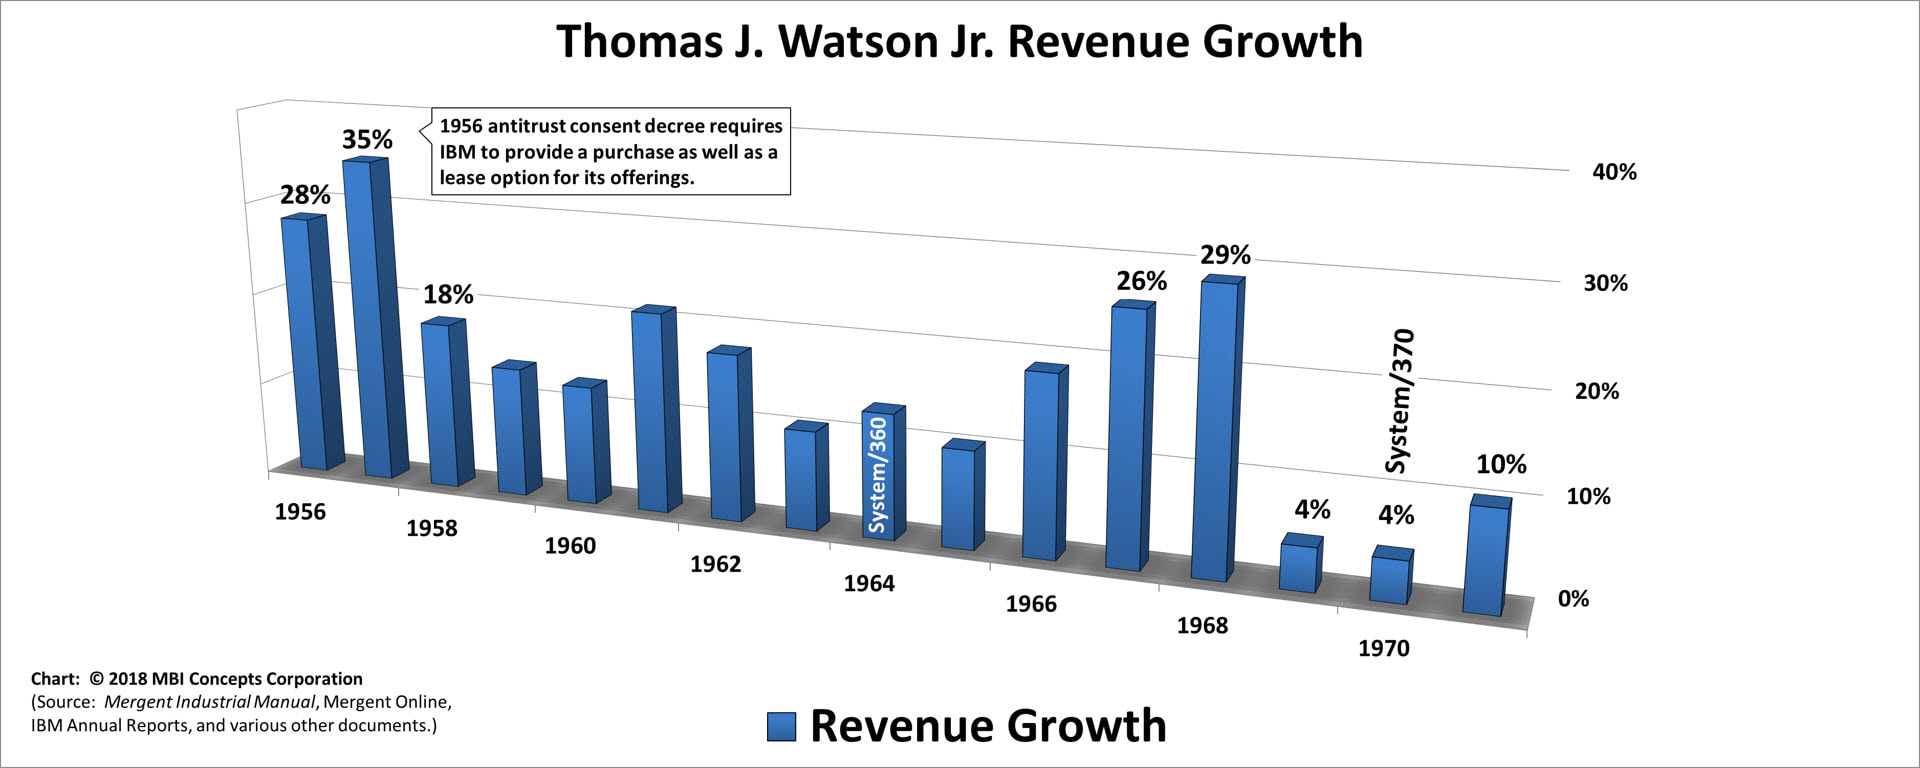 A color bar chart showing IBM's yearly revenue growth from 1956 to 1970 for Thomas J. Watson Jr.